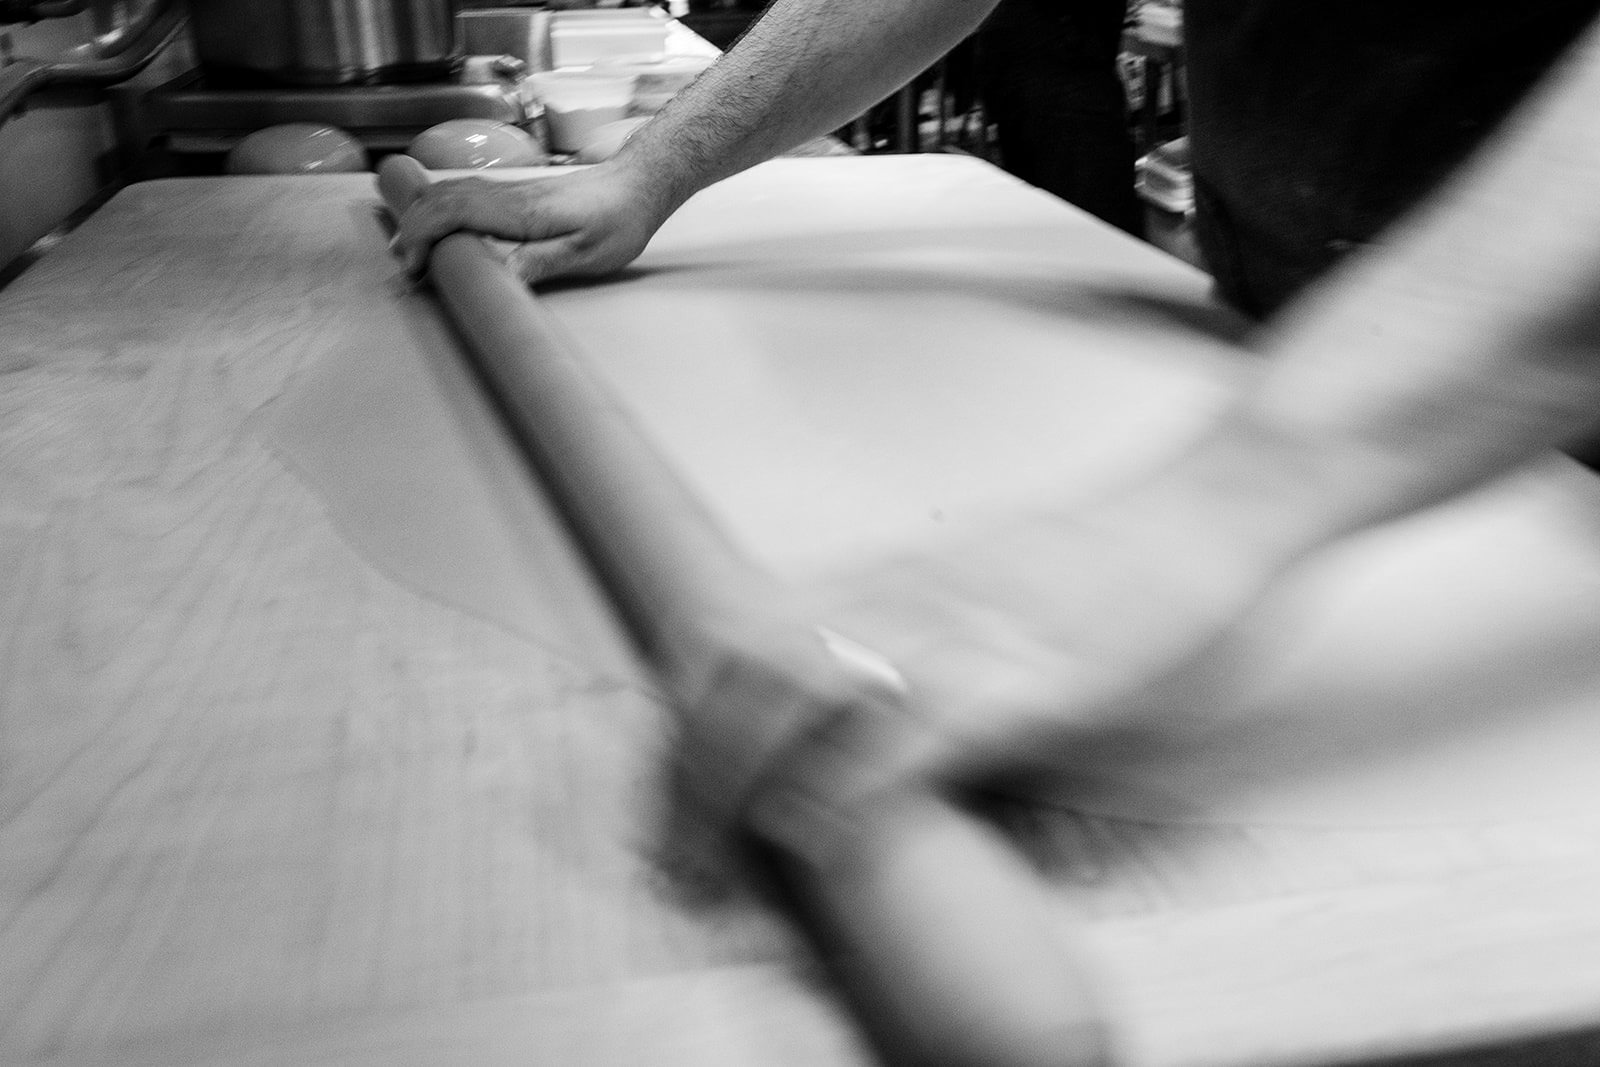 Hands rolling pasta dough at Pastificio d'Oro in Portland, OR - photo by Jenny Kang Photography